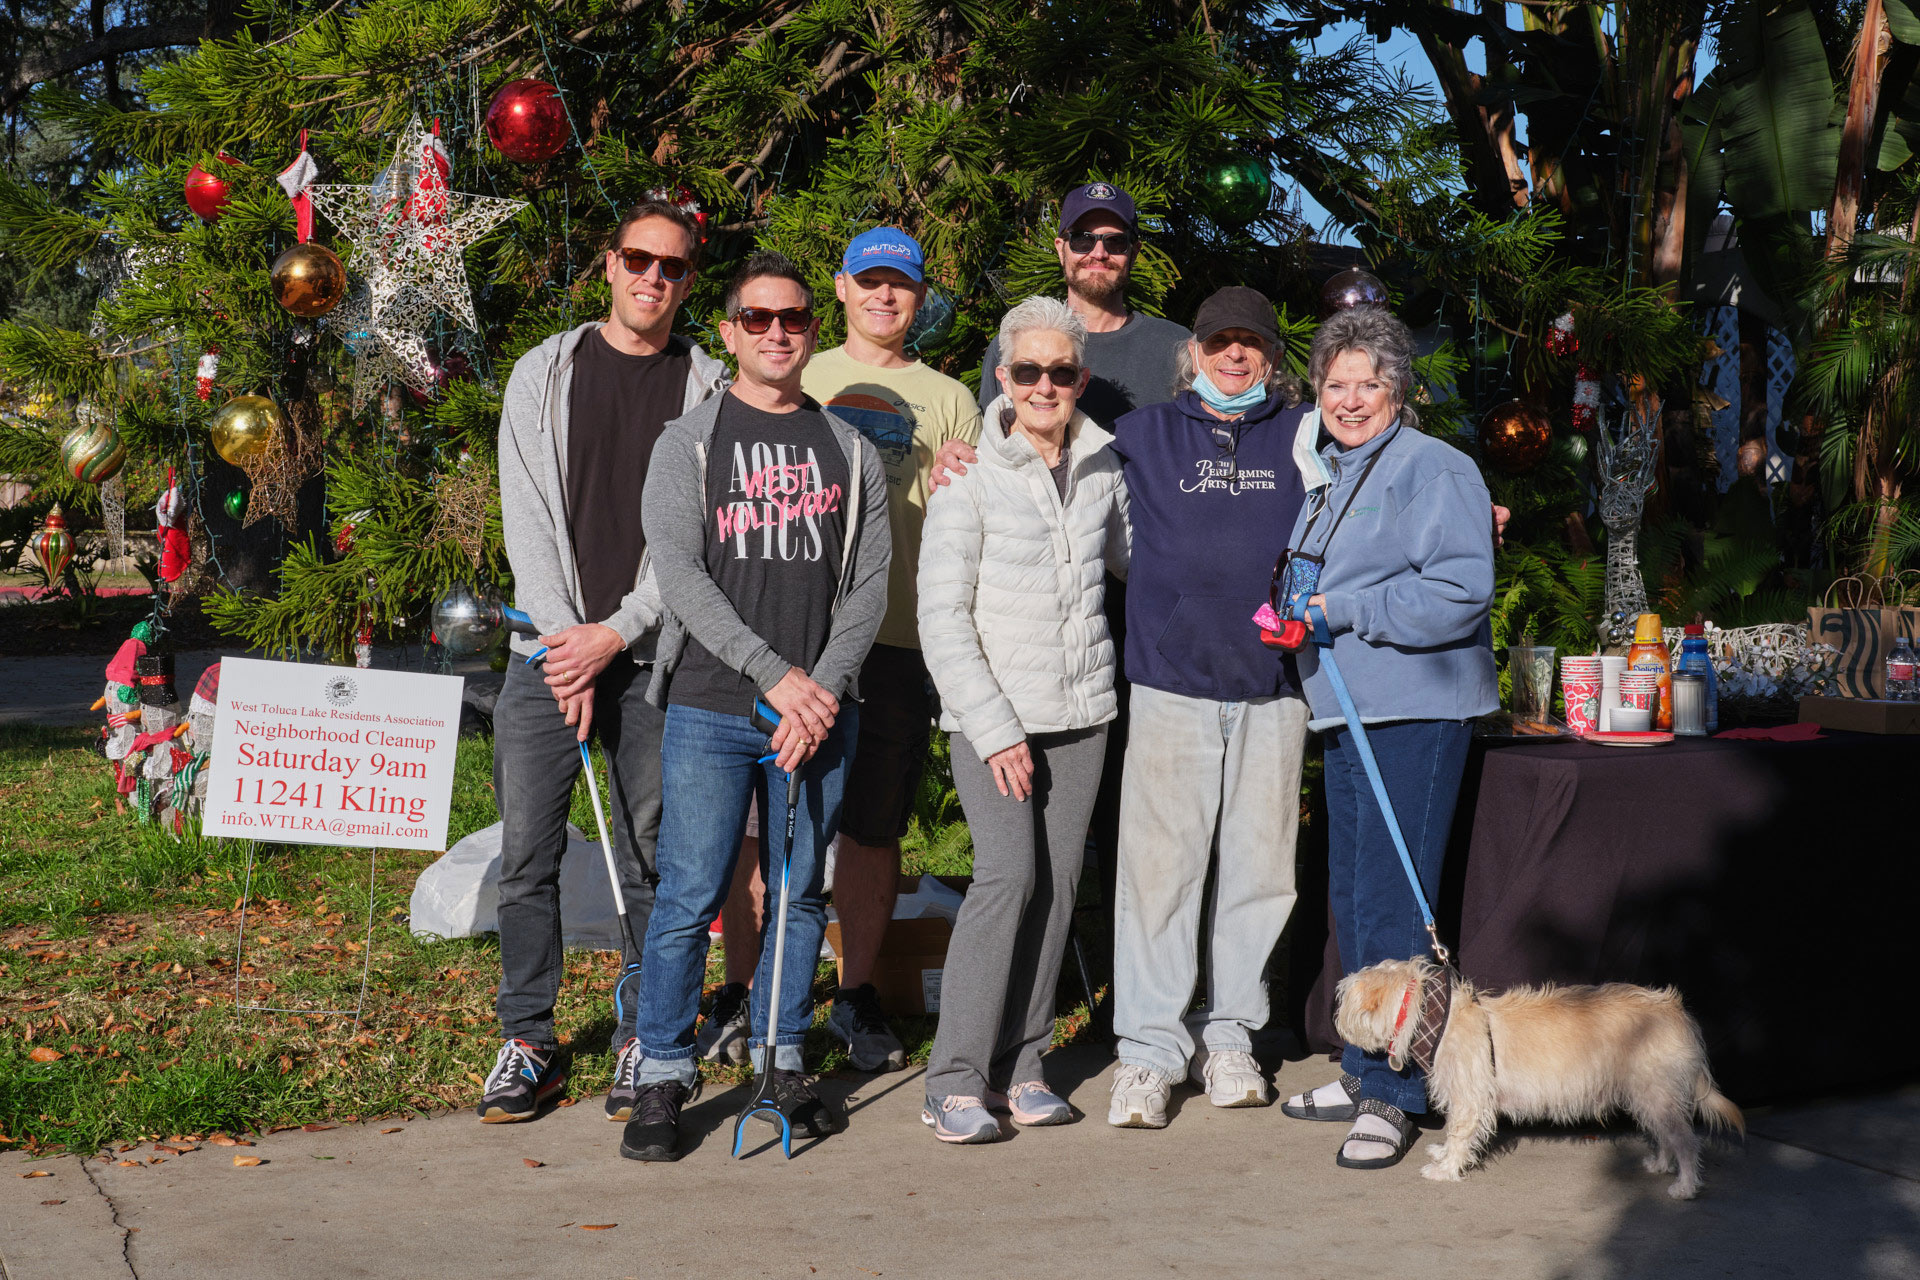 west-toluca-lake-community-cleanup-1